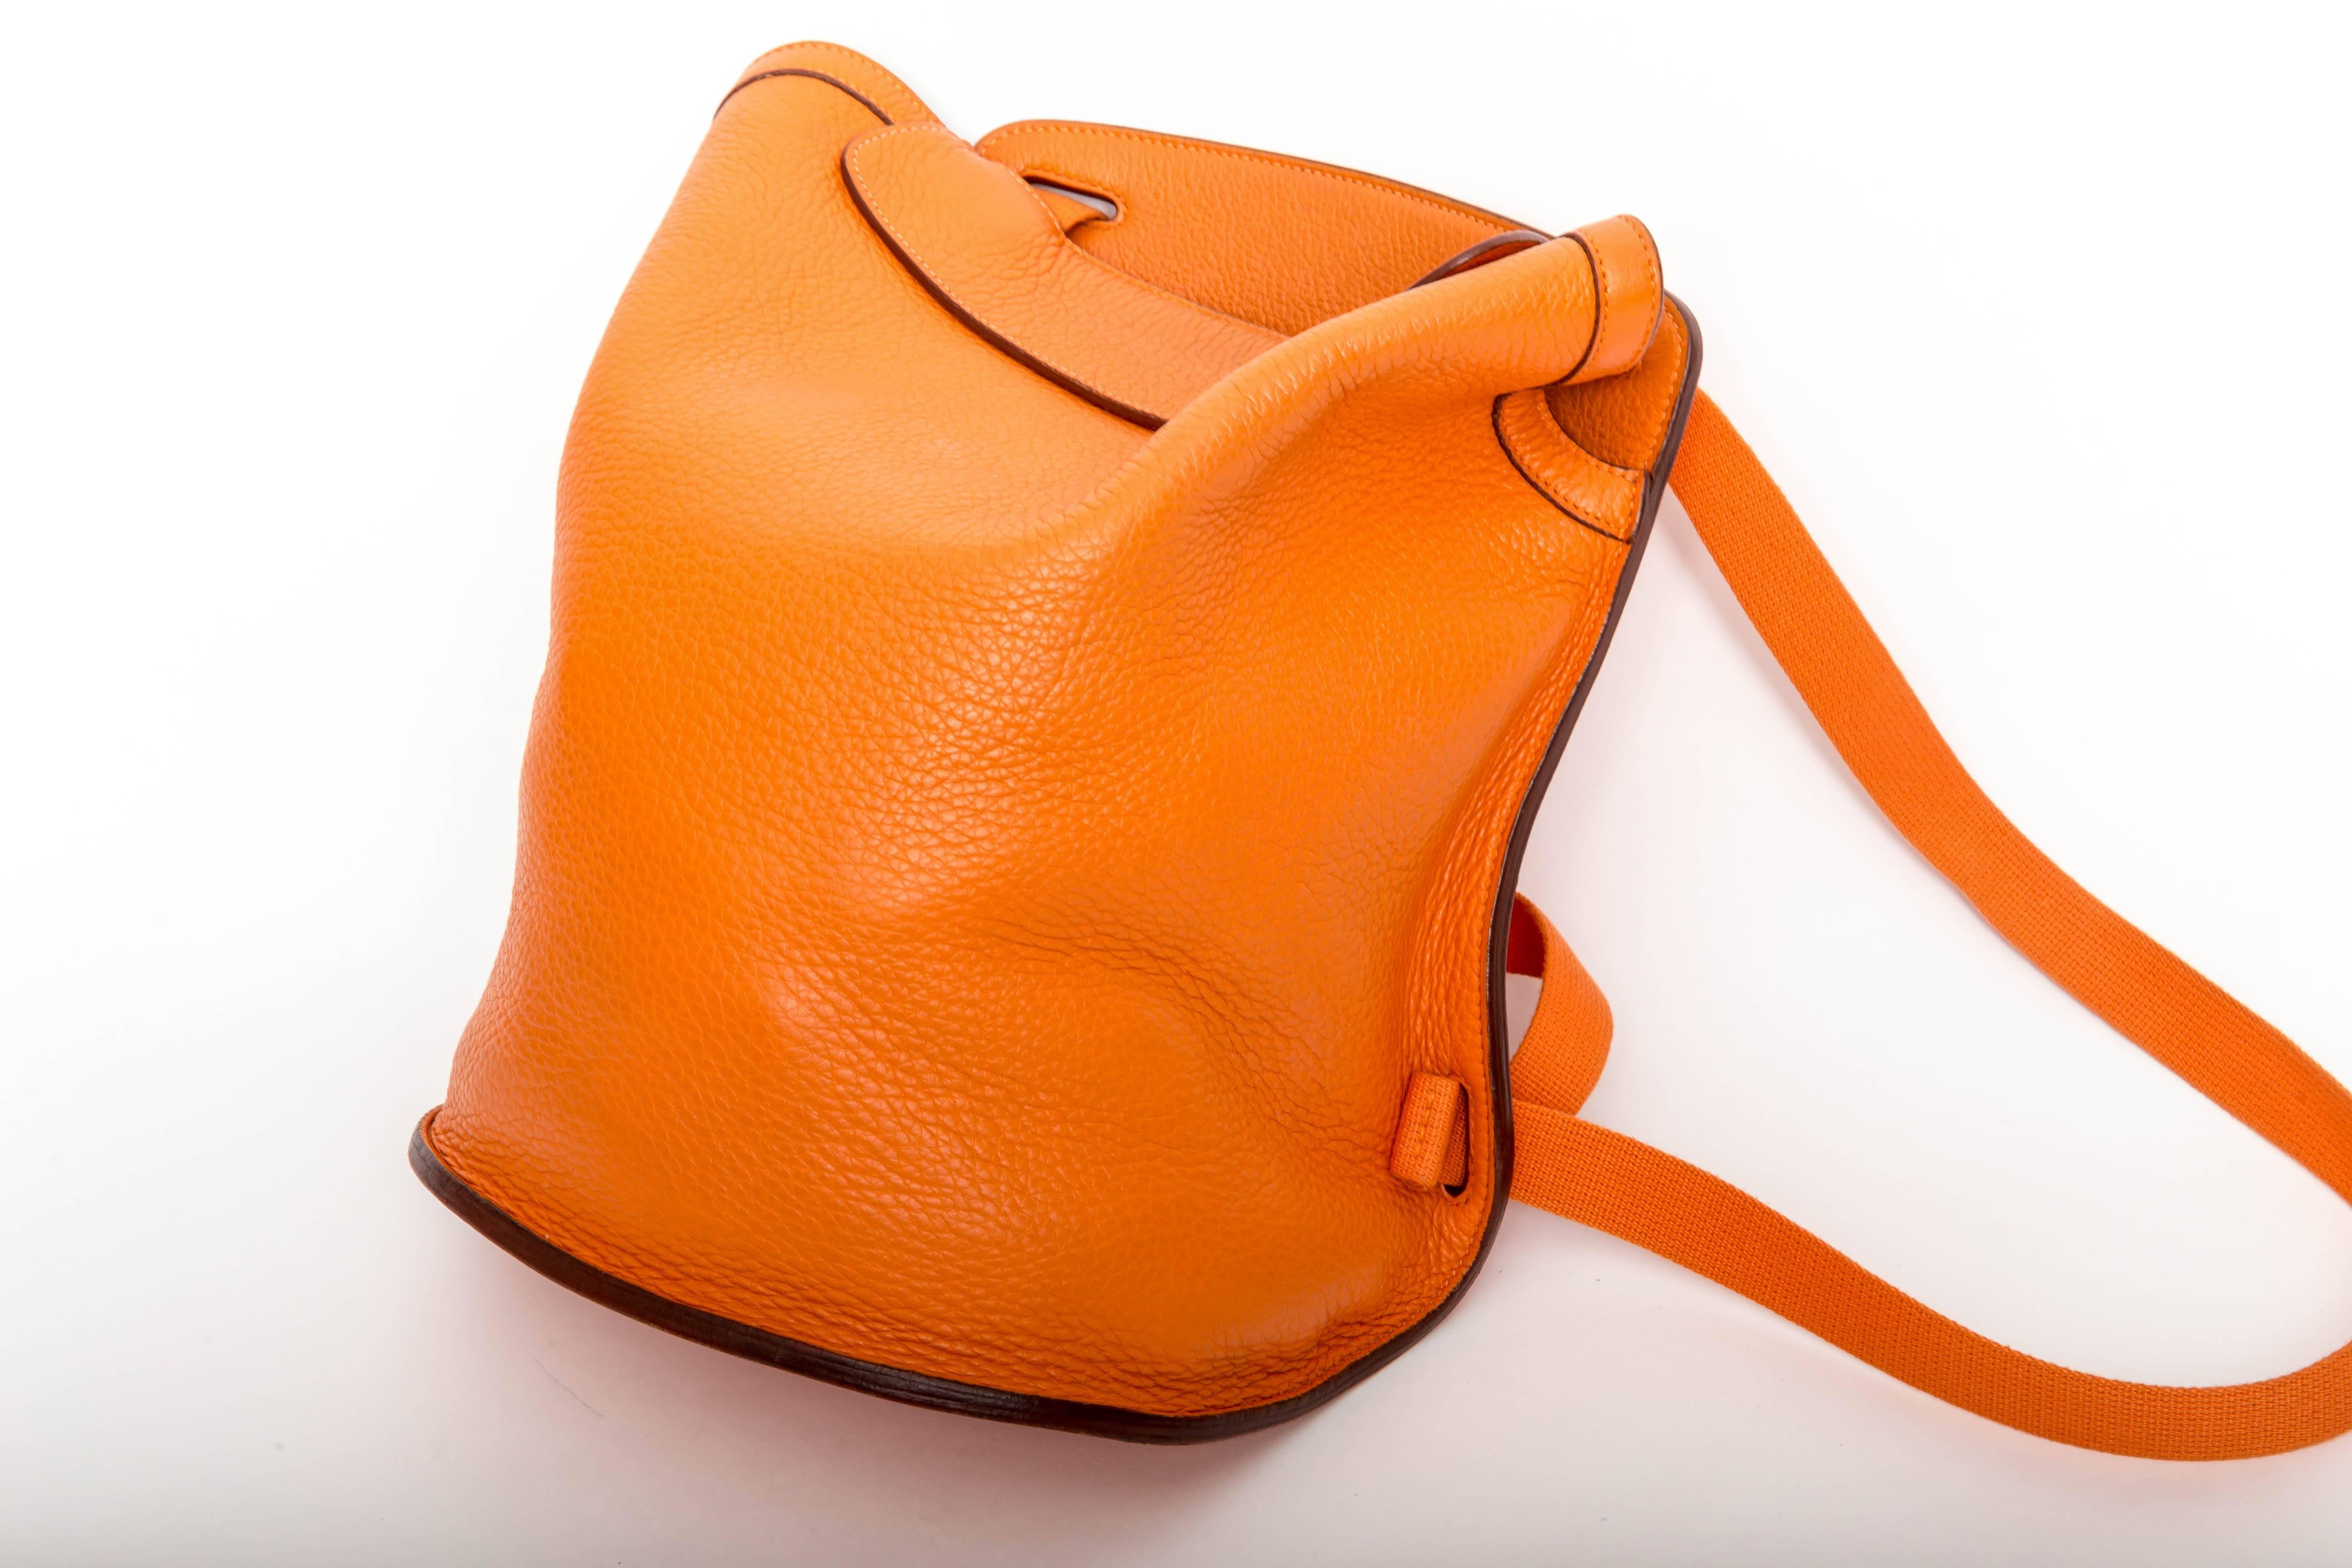 Fabulous Hermes Backpack in Orange Clemence with Dustbag.
Some marks to interior bottom of bag.
Exterior is in excellent condition.
Straps were recently replaced by Hermes and are in immaculate condition.